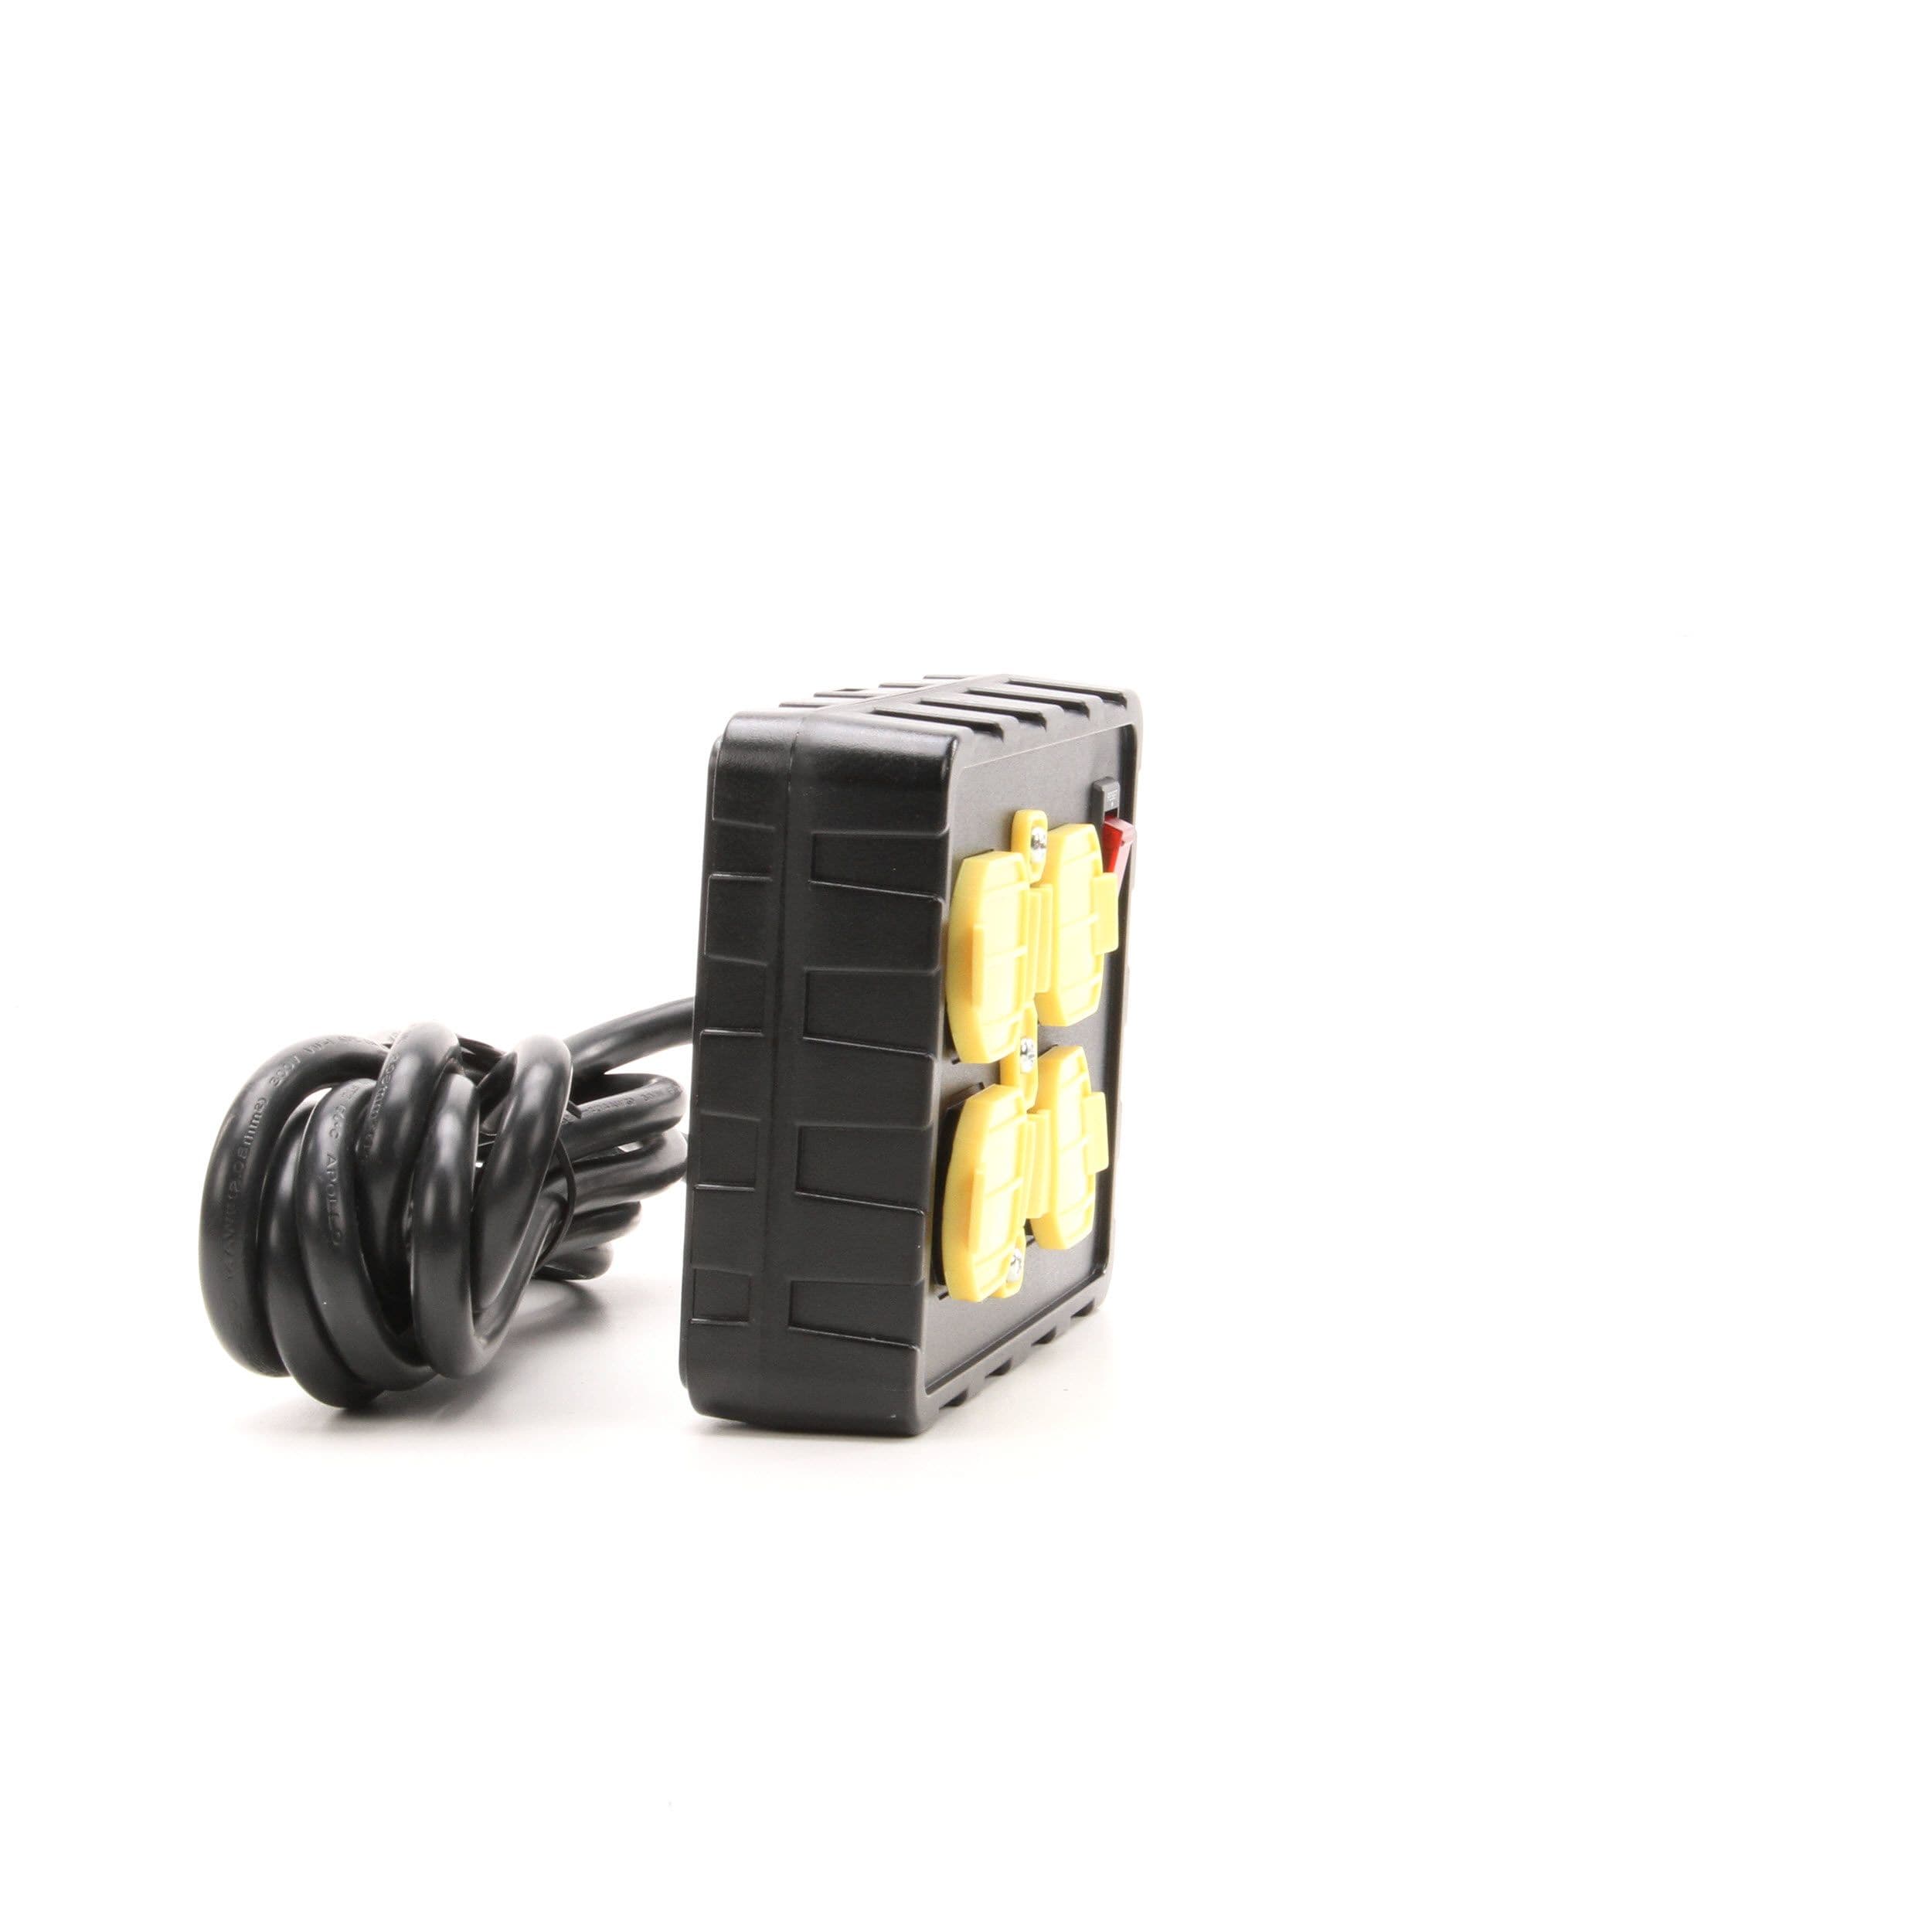 Over-Load Guard Flexible Black Yellow Extension Cord Built-In Circuit Breaker